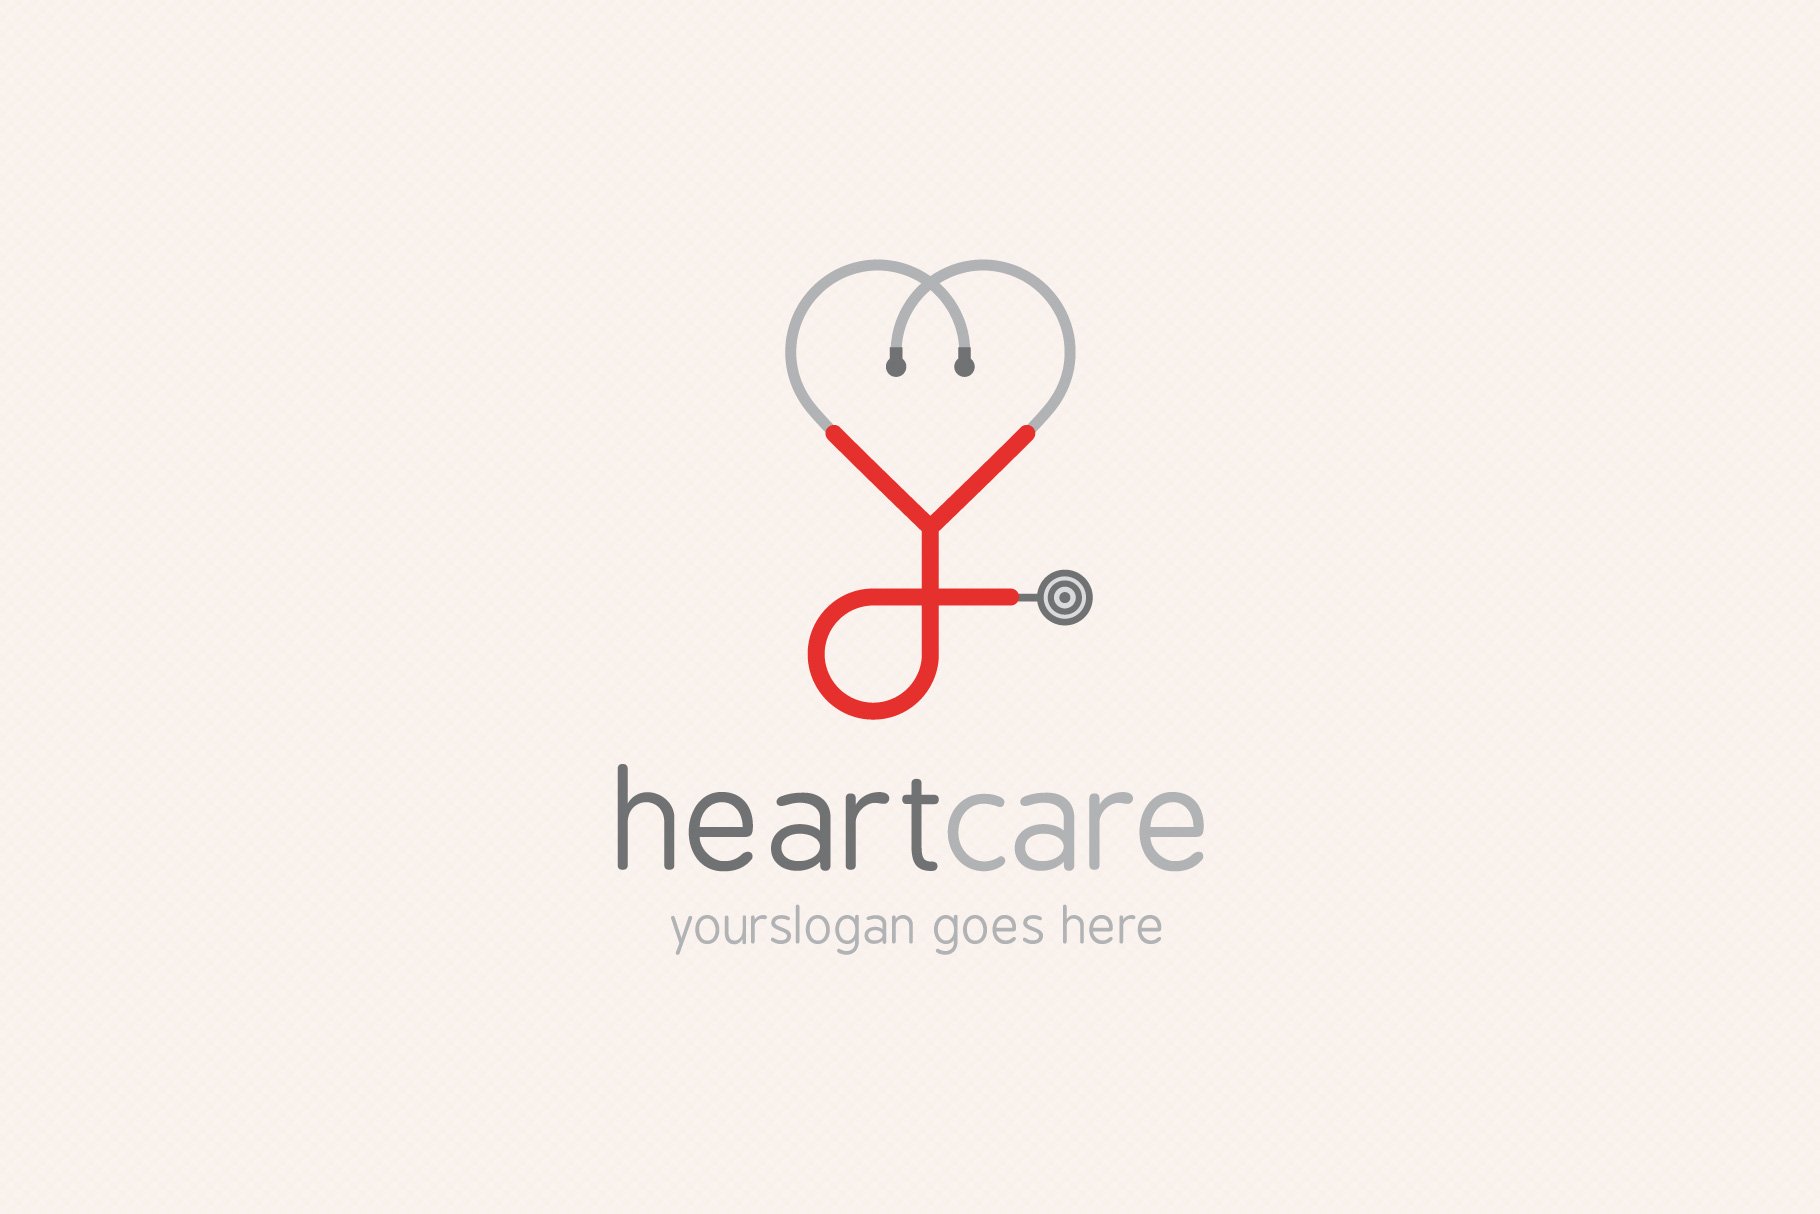 Heart Care Logo cover image.